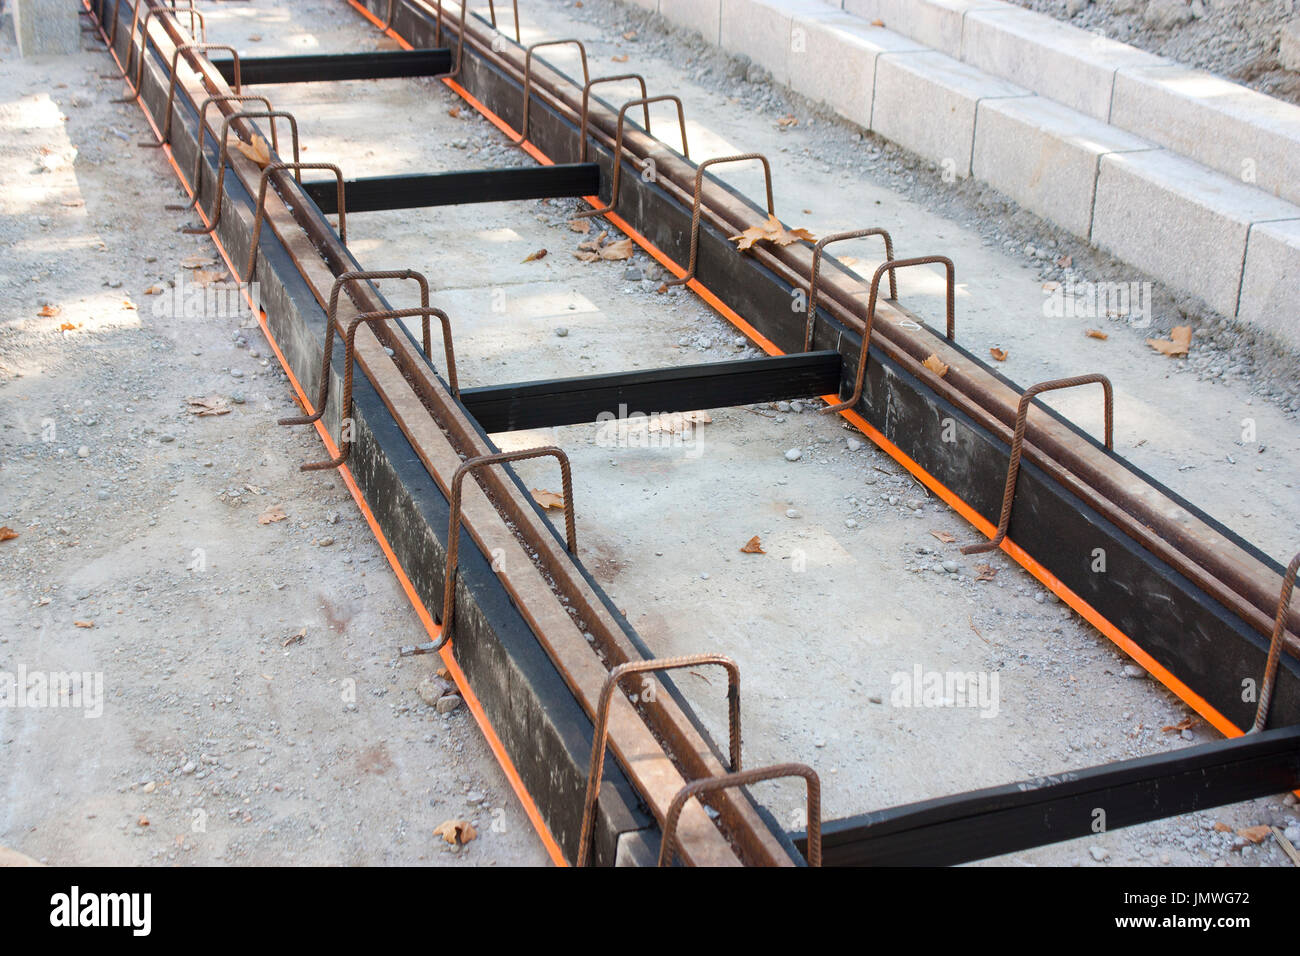 Construction of tramway track with steel rails coating - vibration damping material for noise reduction, in the urban area Stock Photo